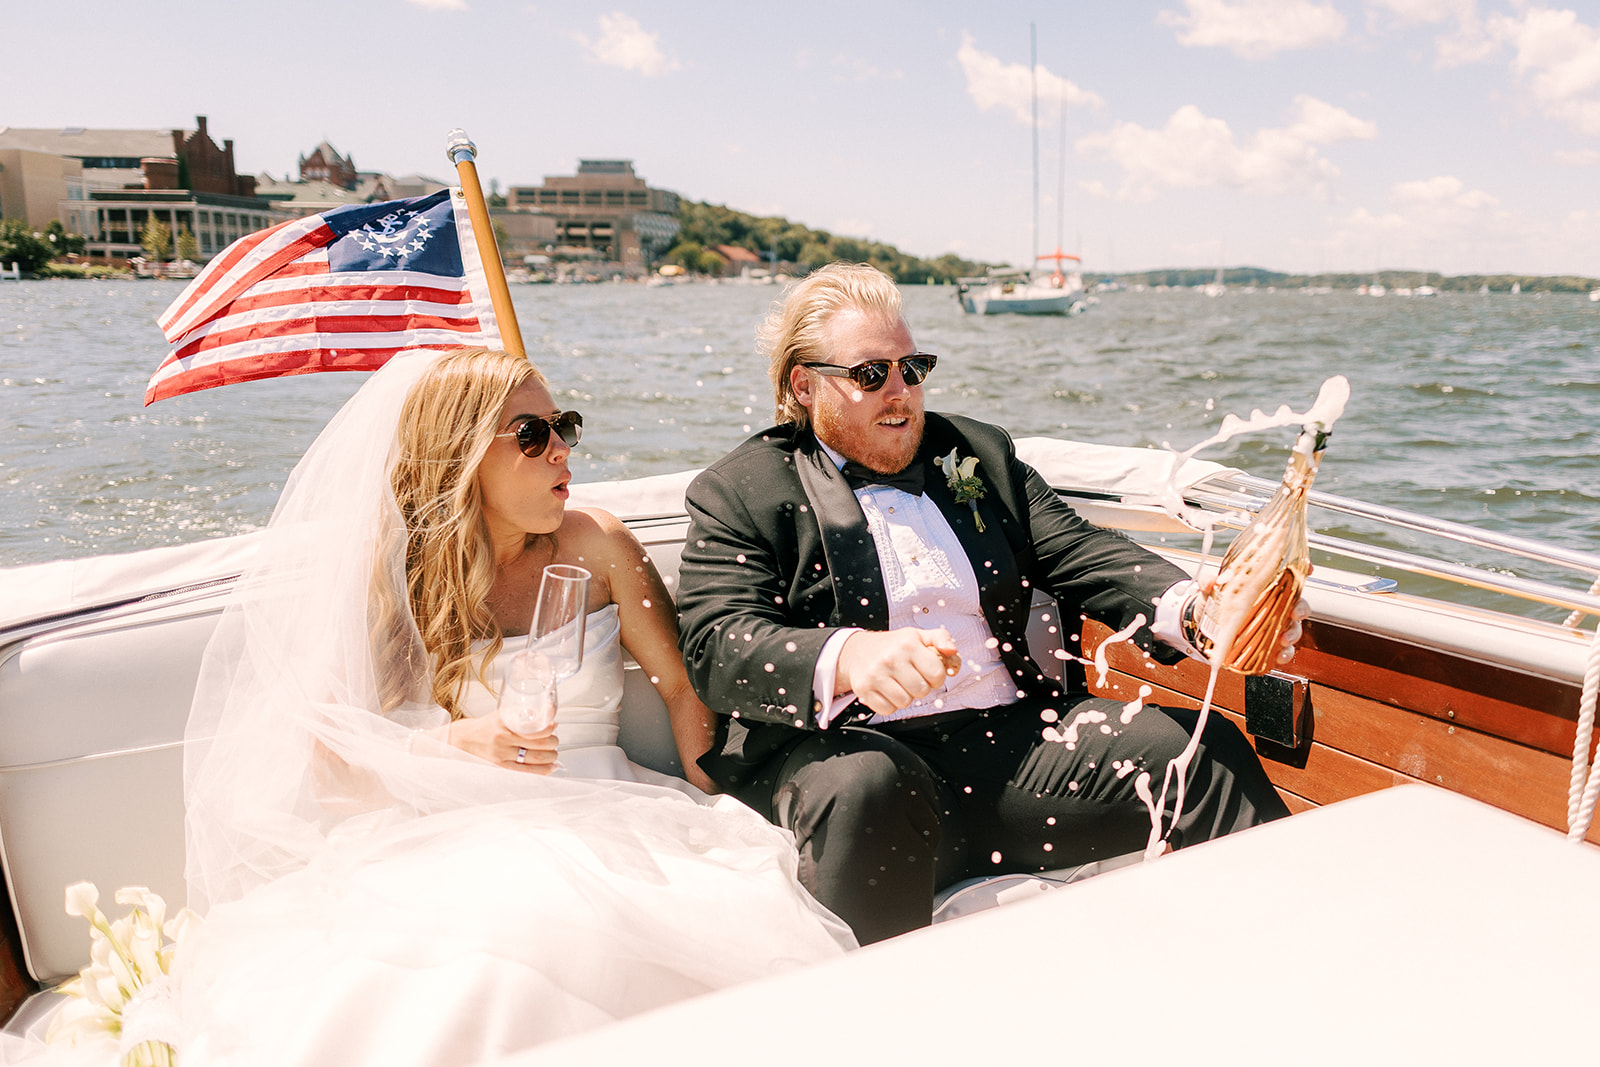 bride and groom enjoy a boat ride on lake mendota on their wedding day in madison wisconsin